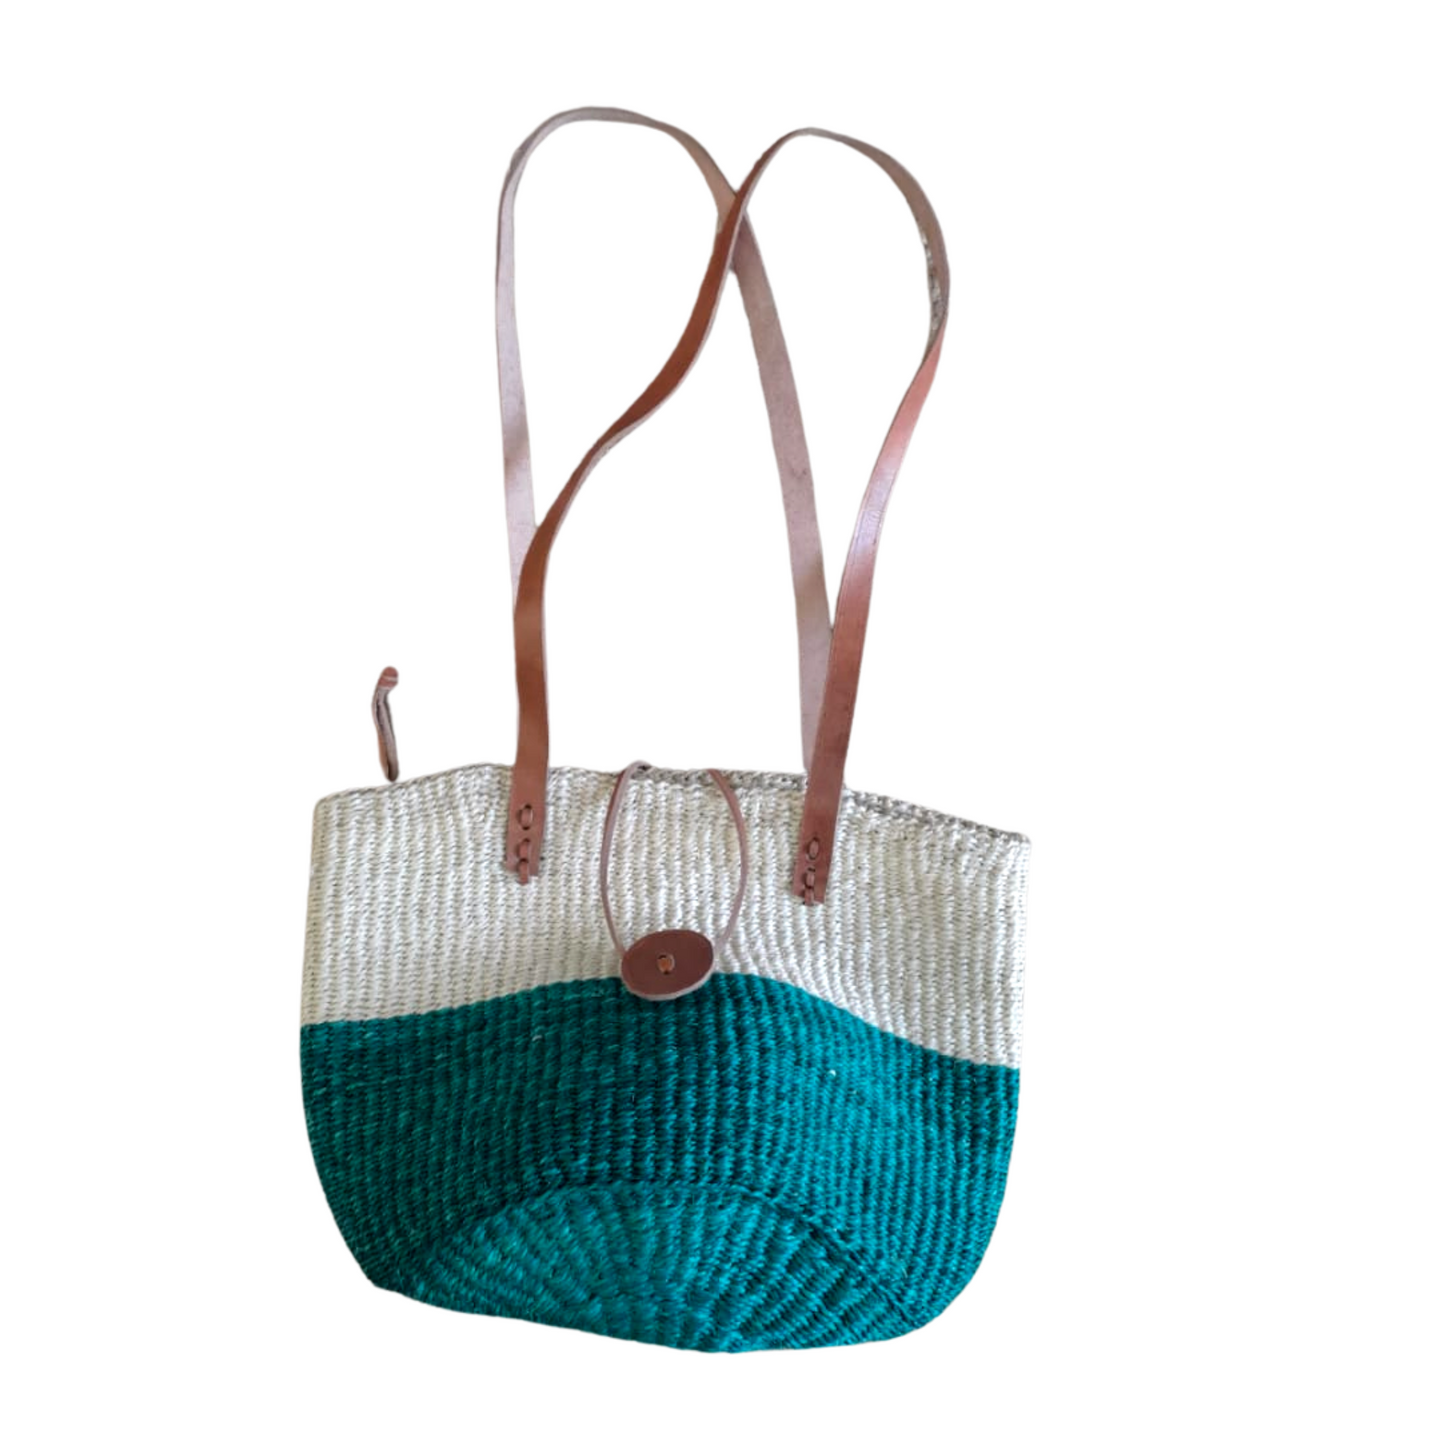 Fynly Sisal Handbags with Leather Straps